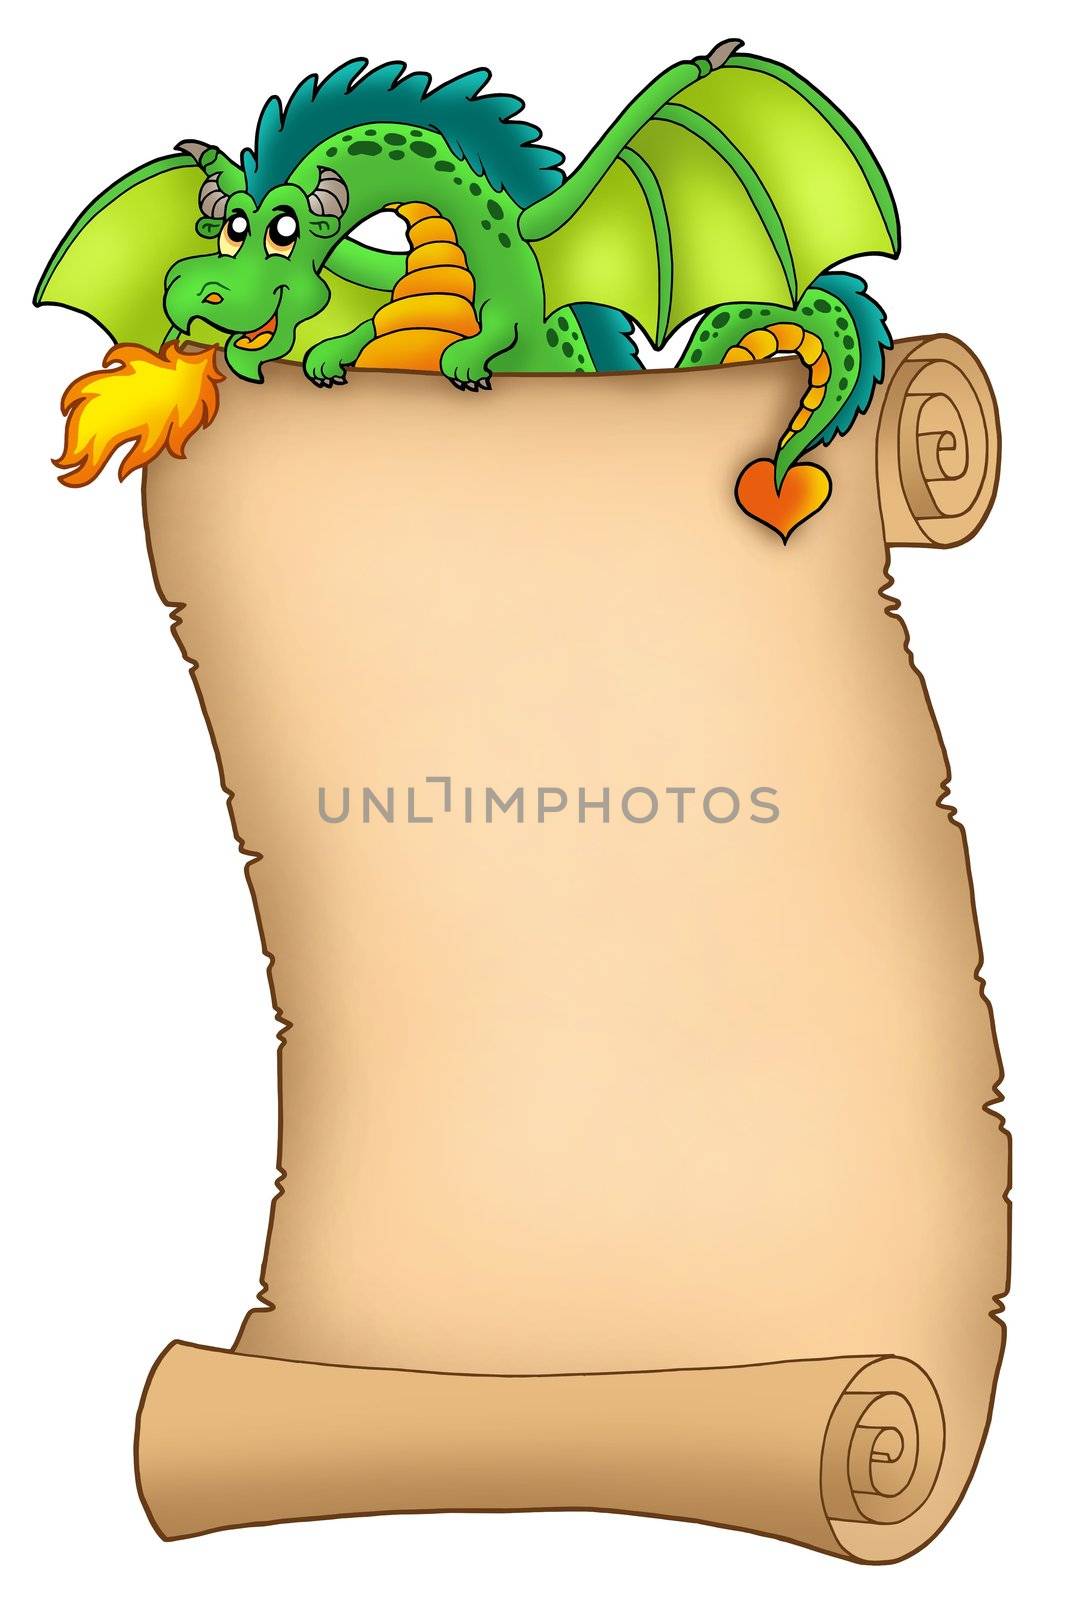 Giant green dragon holding scroll by clairev